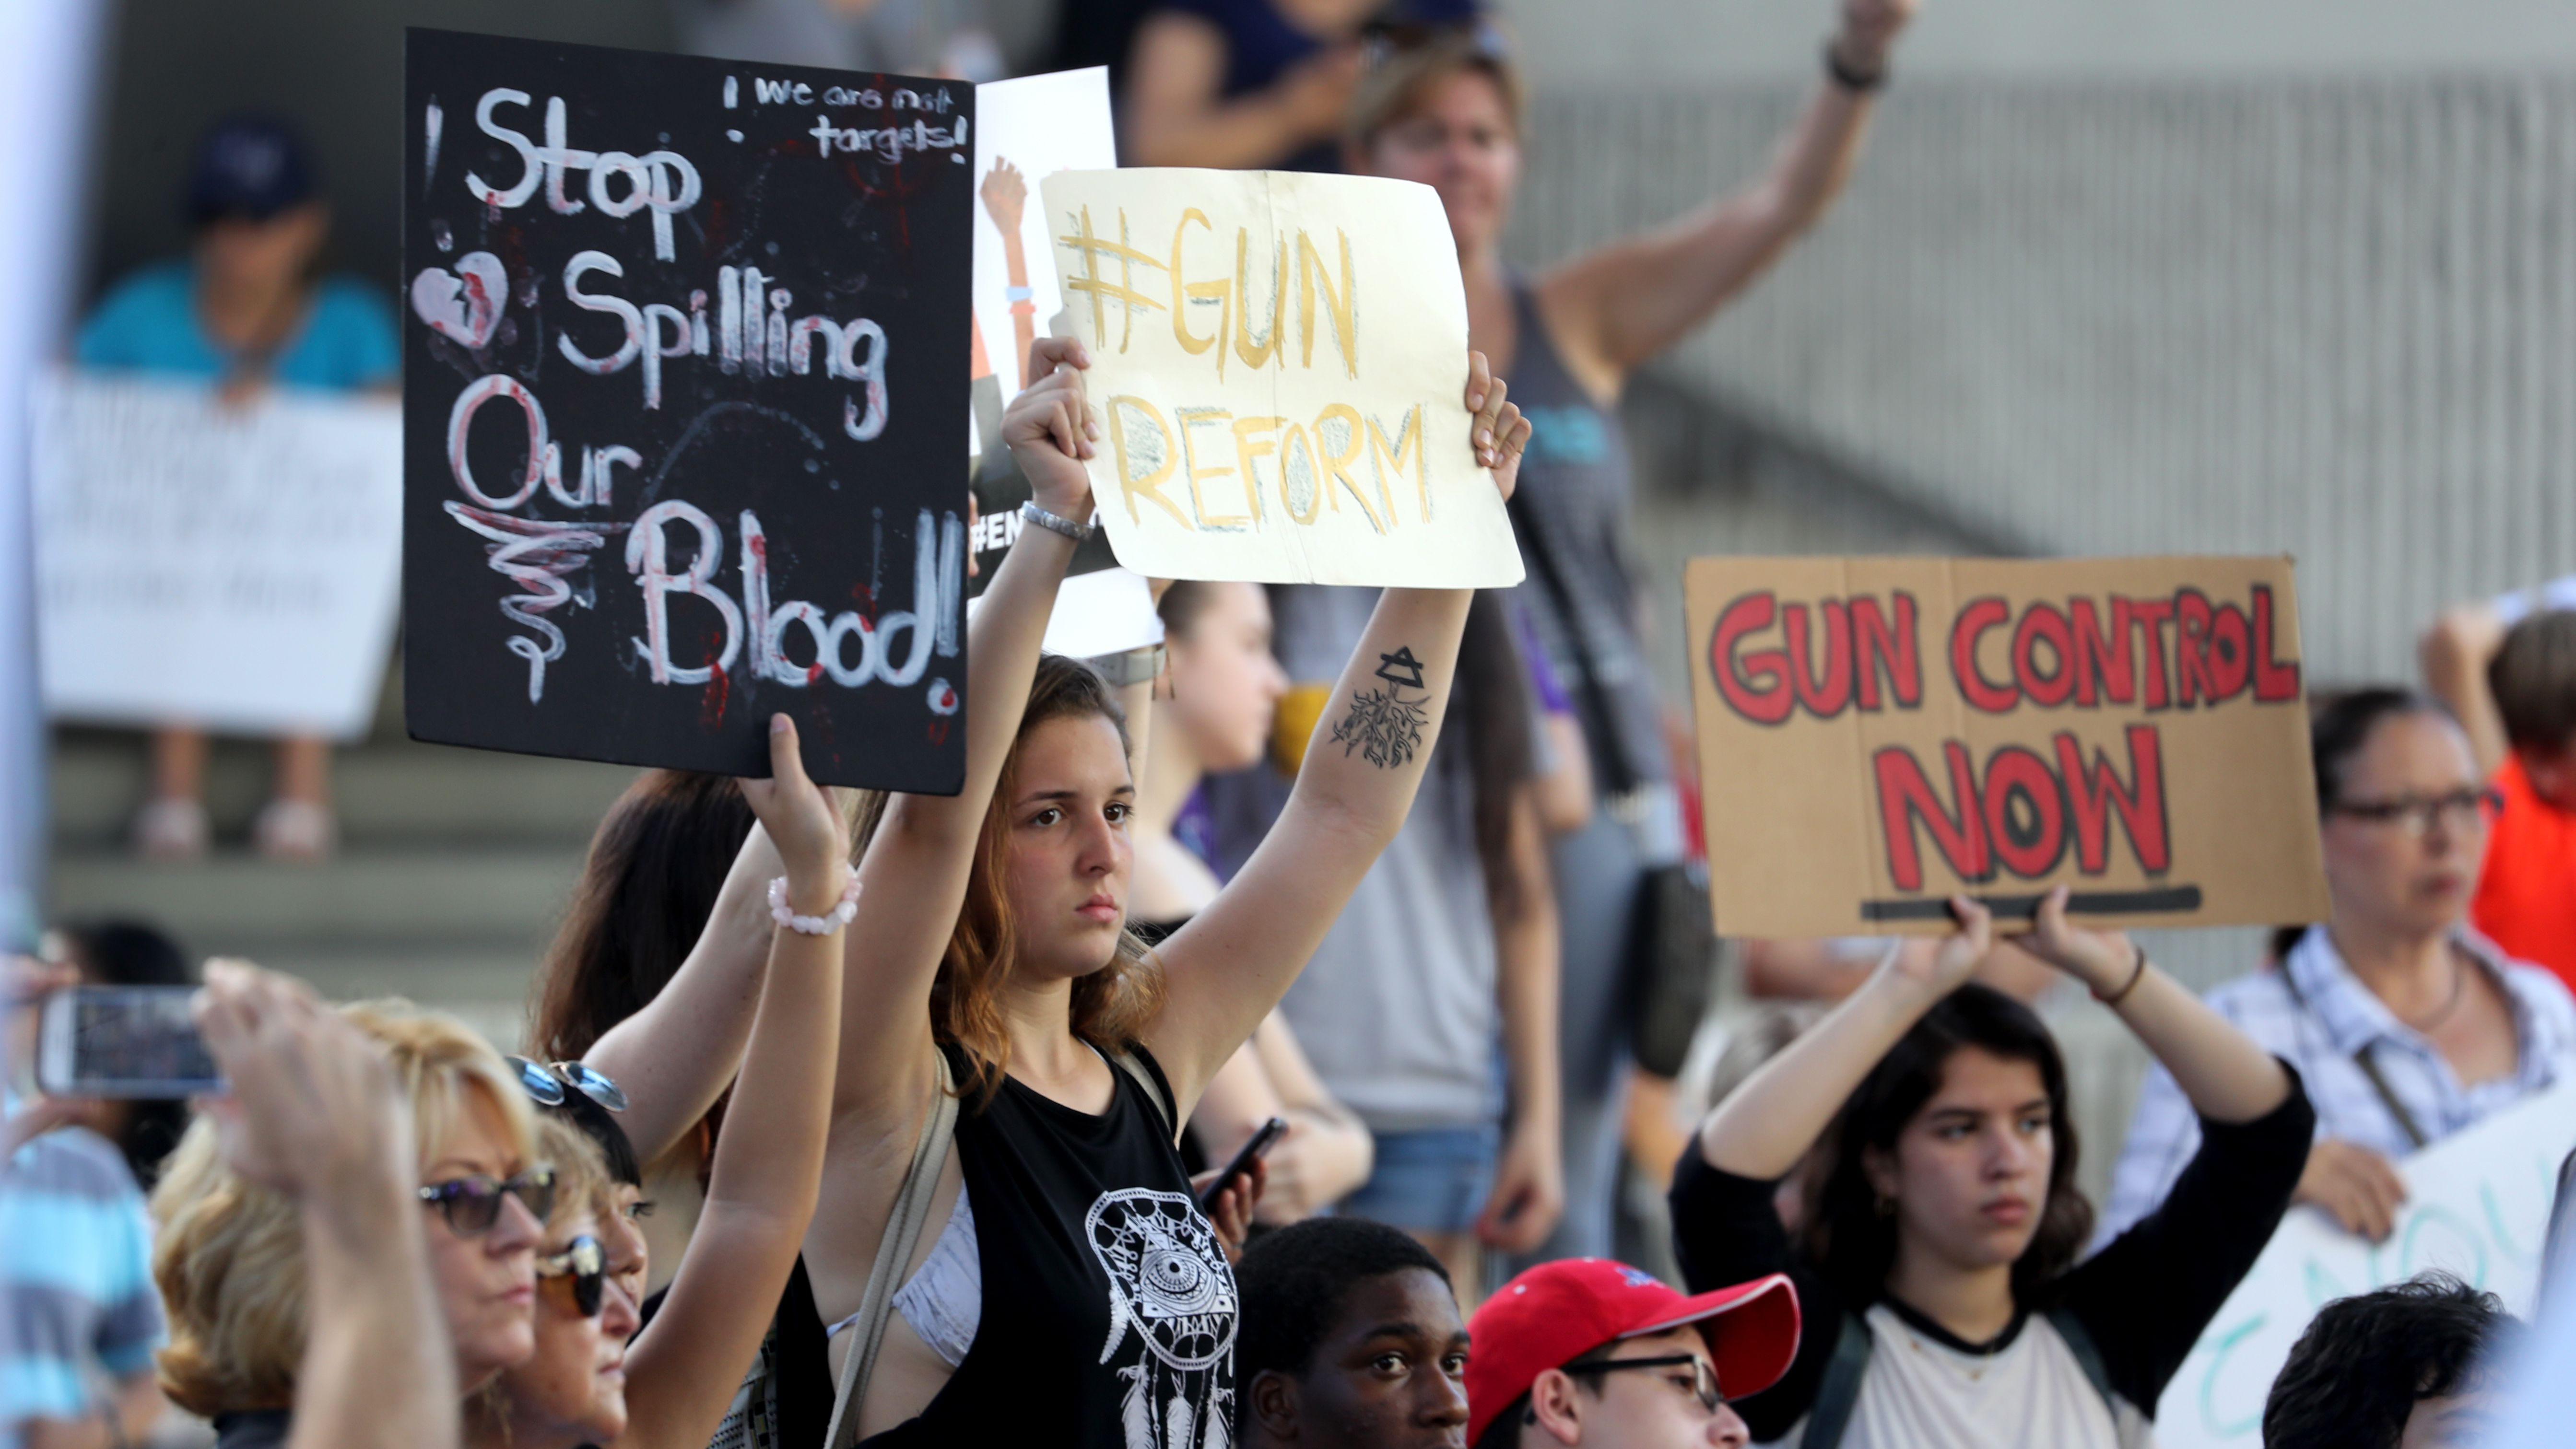 Protesters attend a rally at the Federal Courthouse in Fort Lauderdale, Fla., to demand government action on firearms, on Saturday, Feb. 17, 2018. Their call to action is a response the massacre at Marjory Stoneman Douglas High School in Parkland, Fla. (Mike Stocker/Sun Sentinel/TNS via Getty Images)